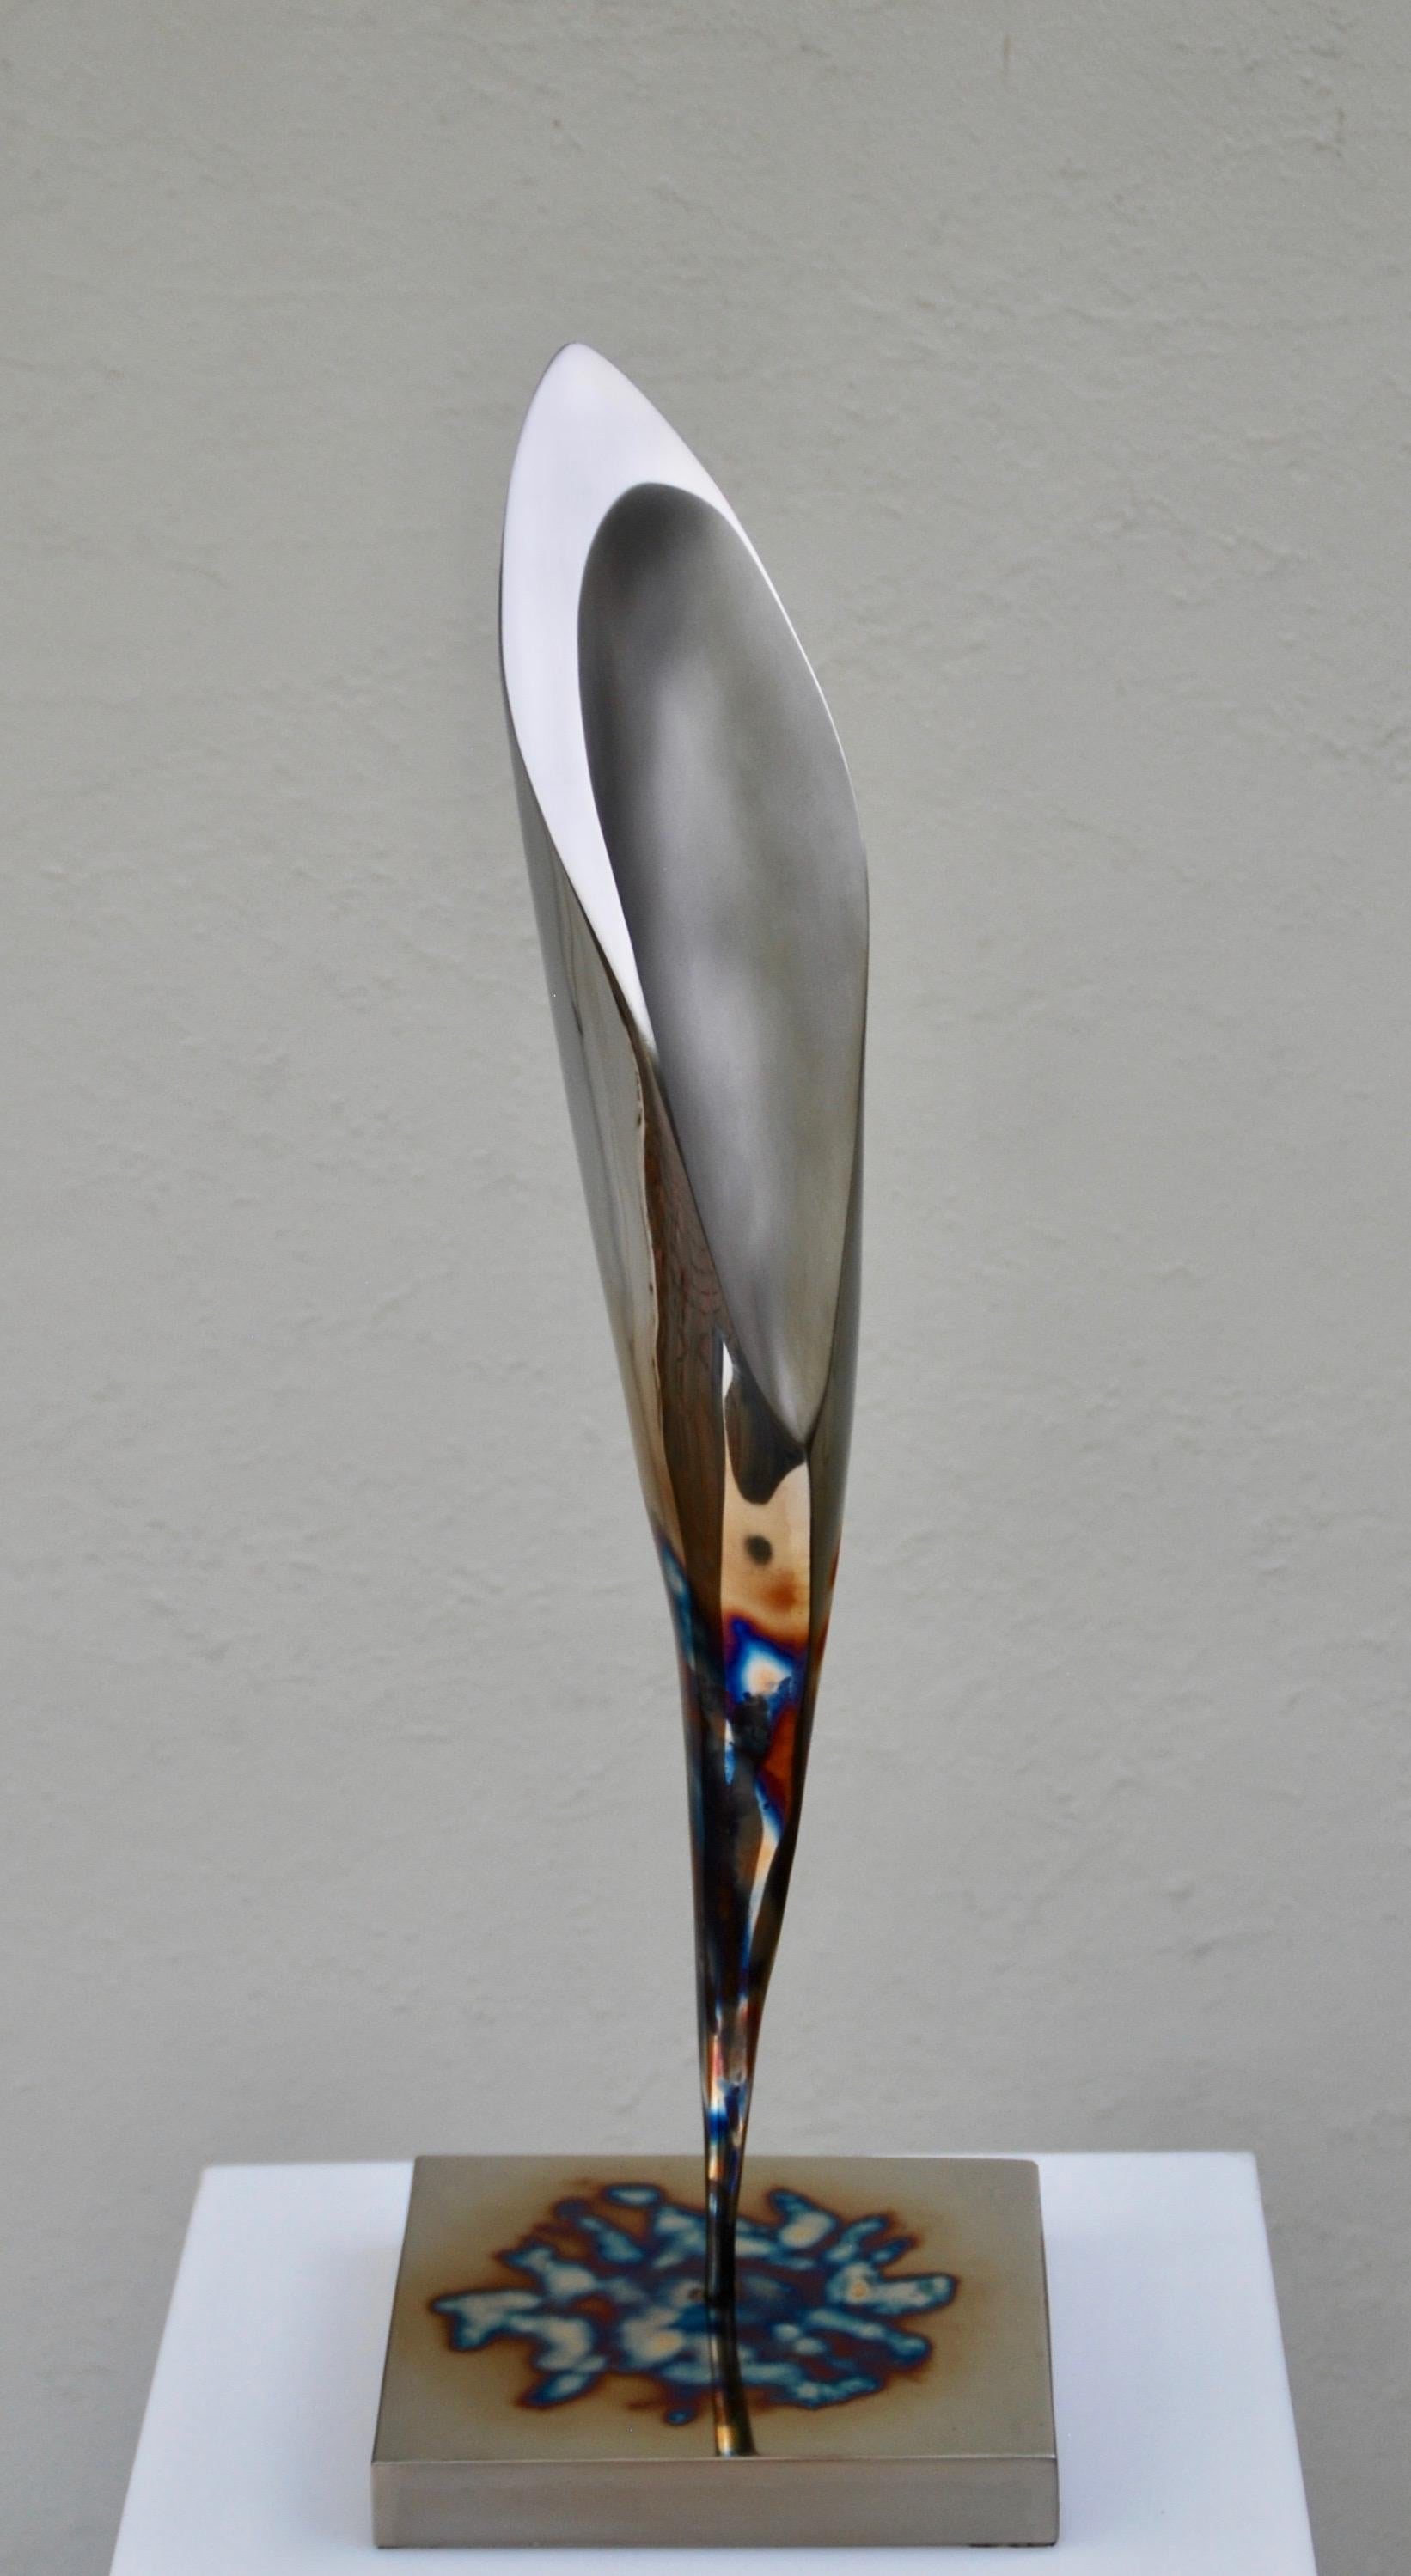 INNER STRENGTH (TABLE TOP) - Gray Abstract Sculpture by Santiago Medina